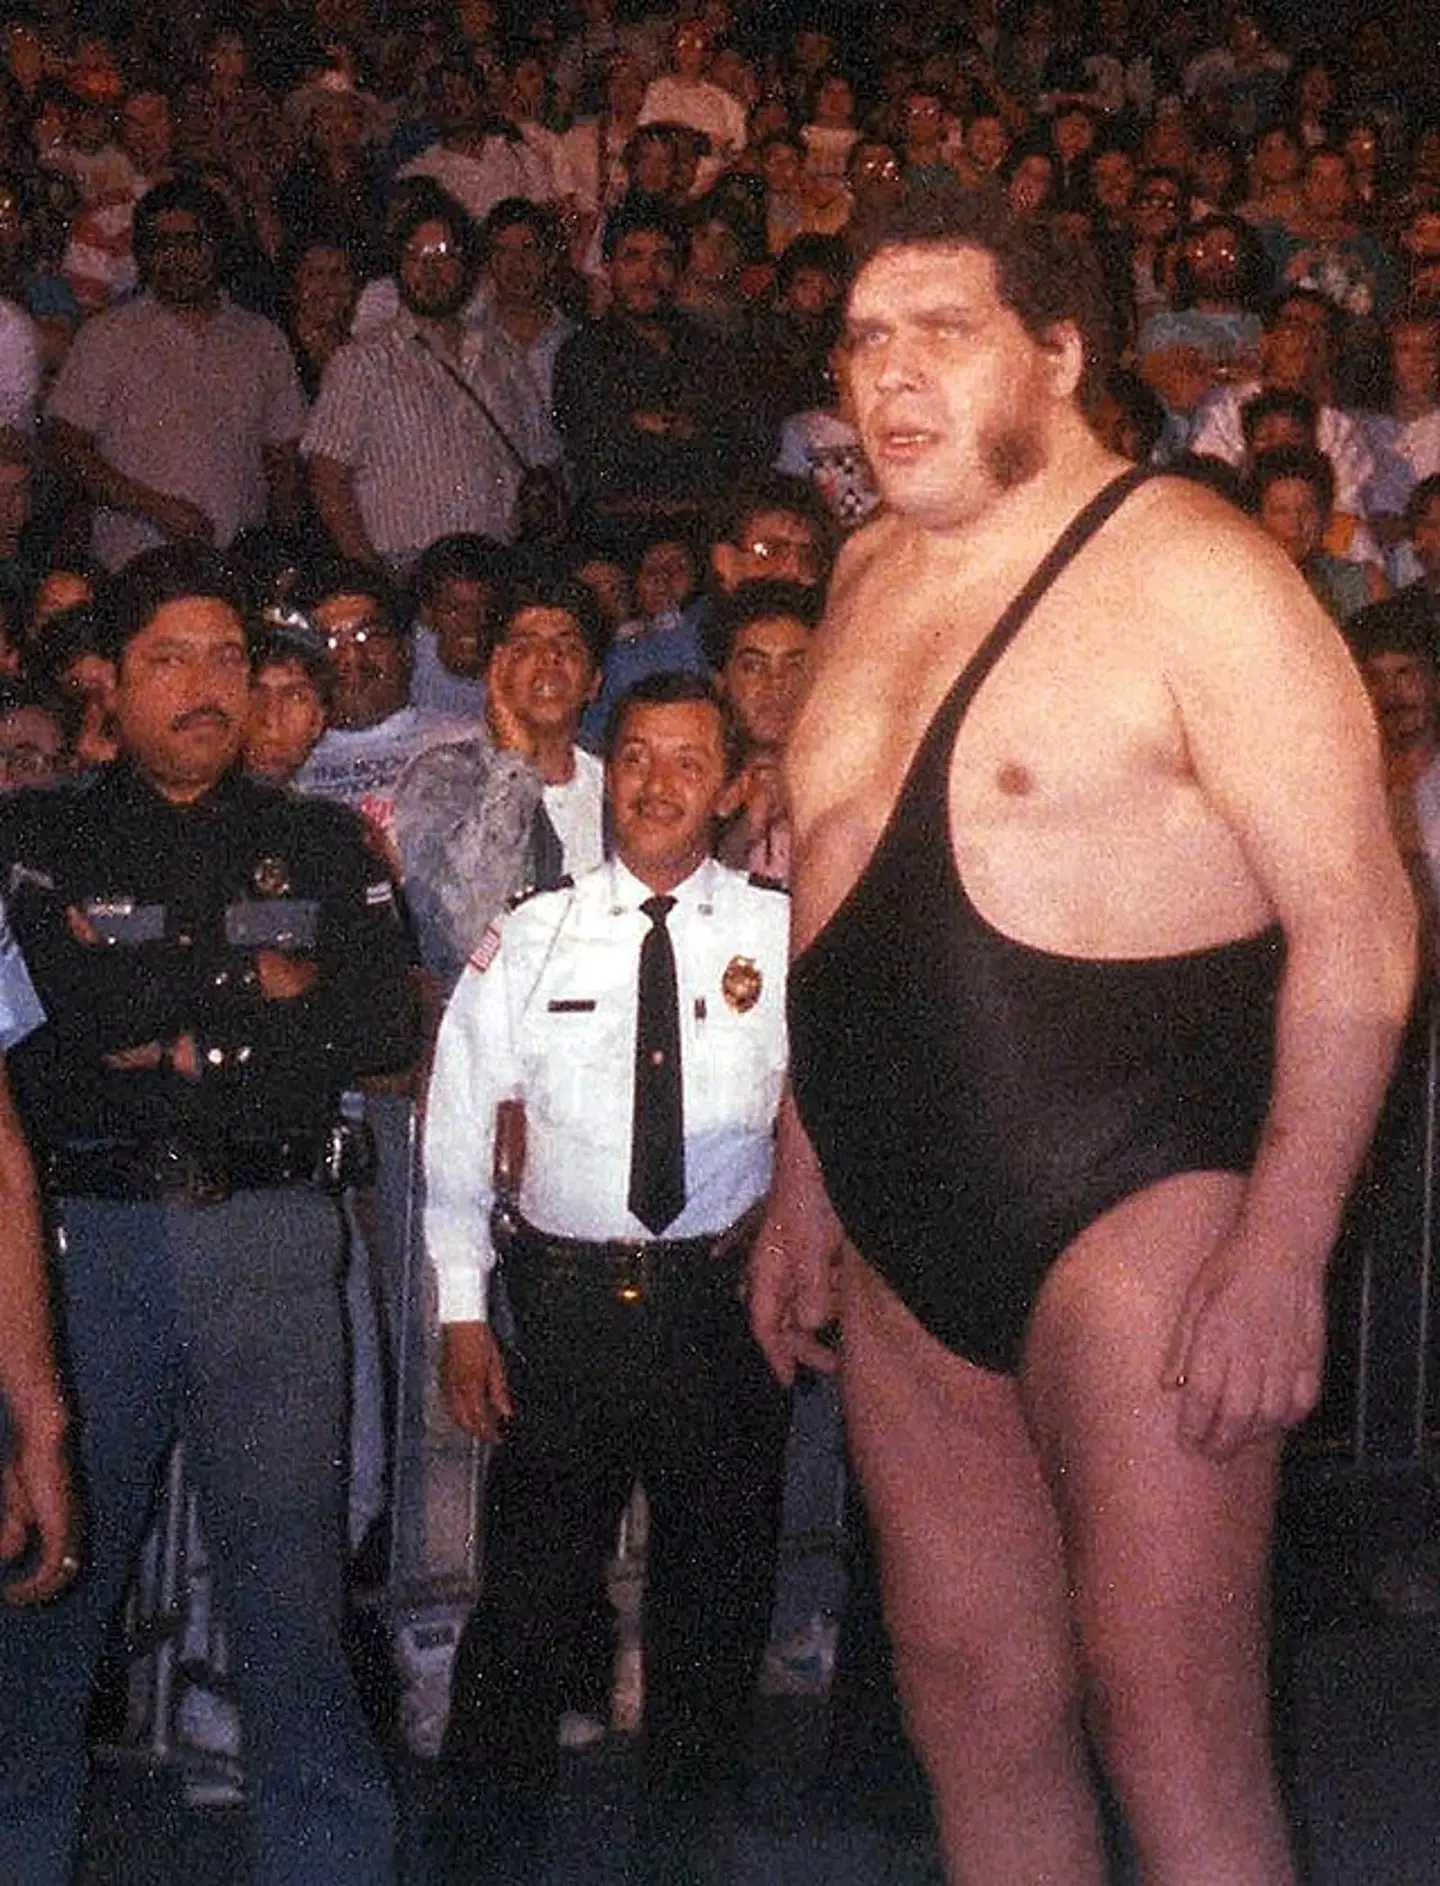 Andre 'The Giant' was able to hold down an ungodly amount of booze.